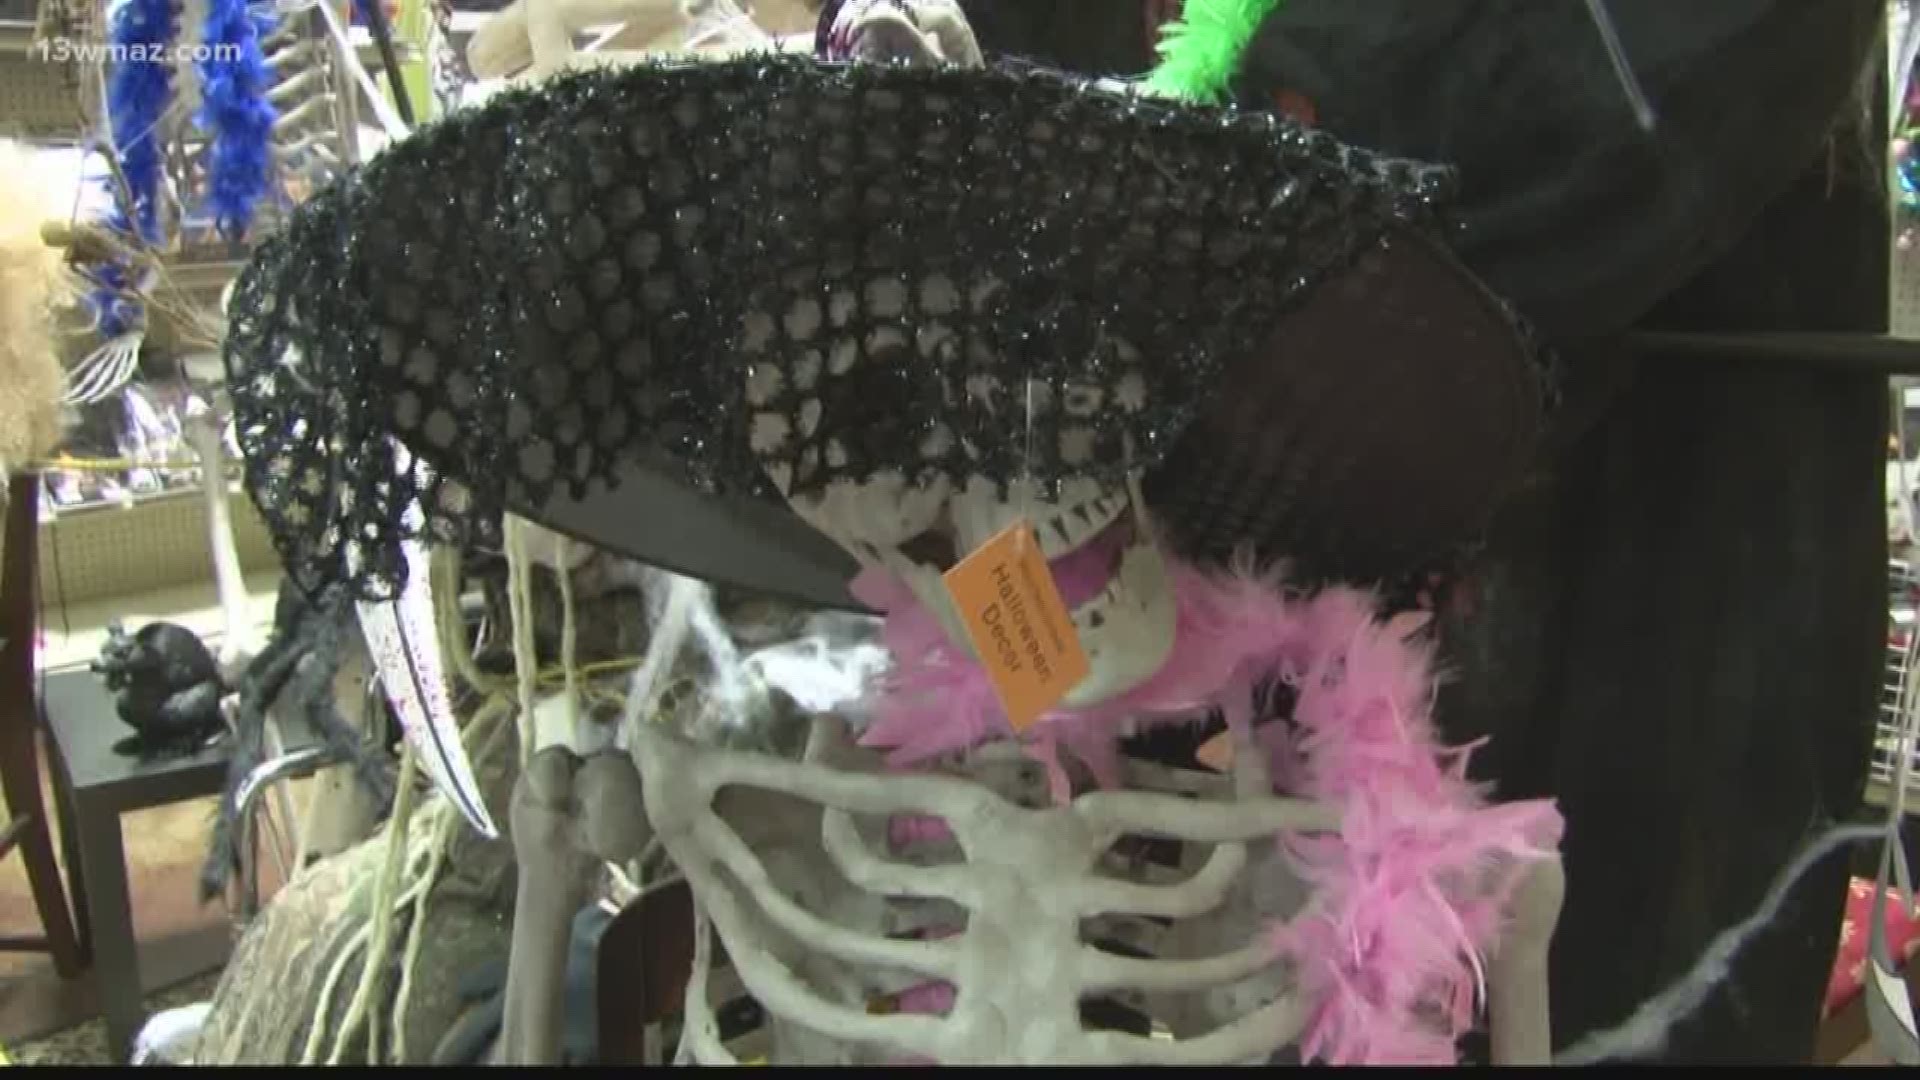 Goodwill gears up for Halloween with dozens of costumes and accessories that are sure to not scare your wallet.